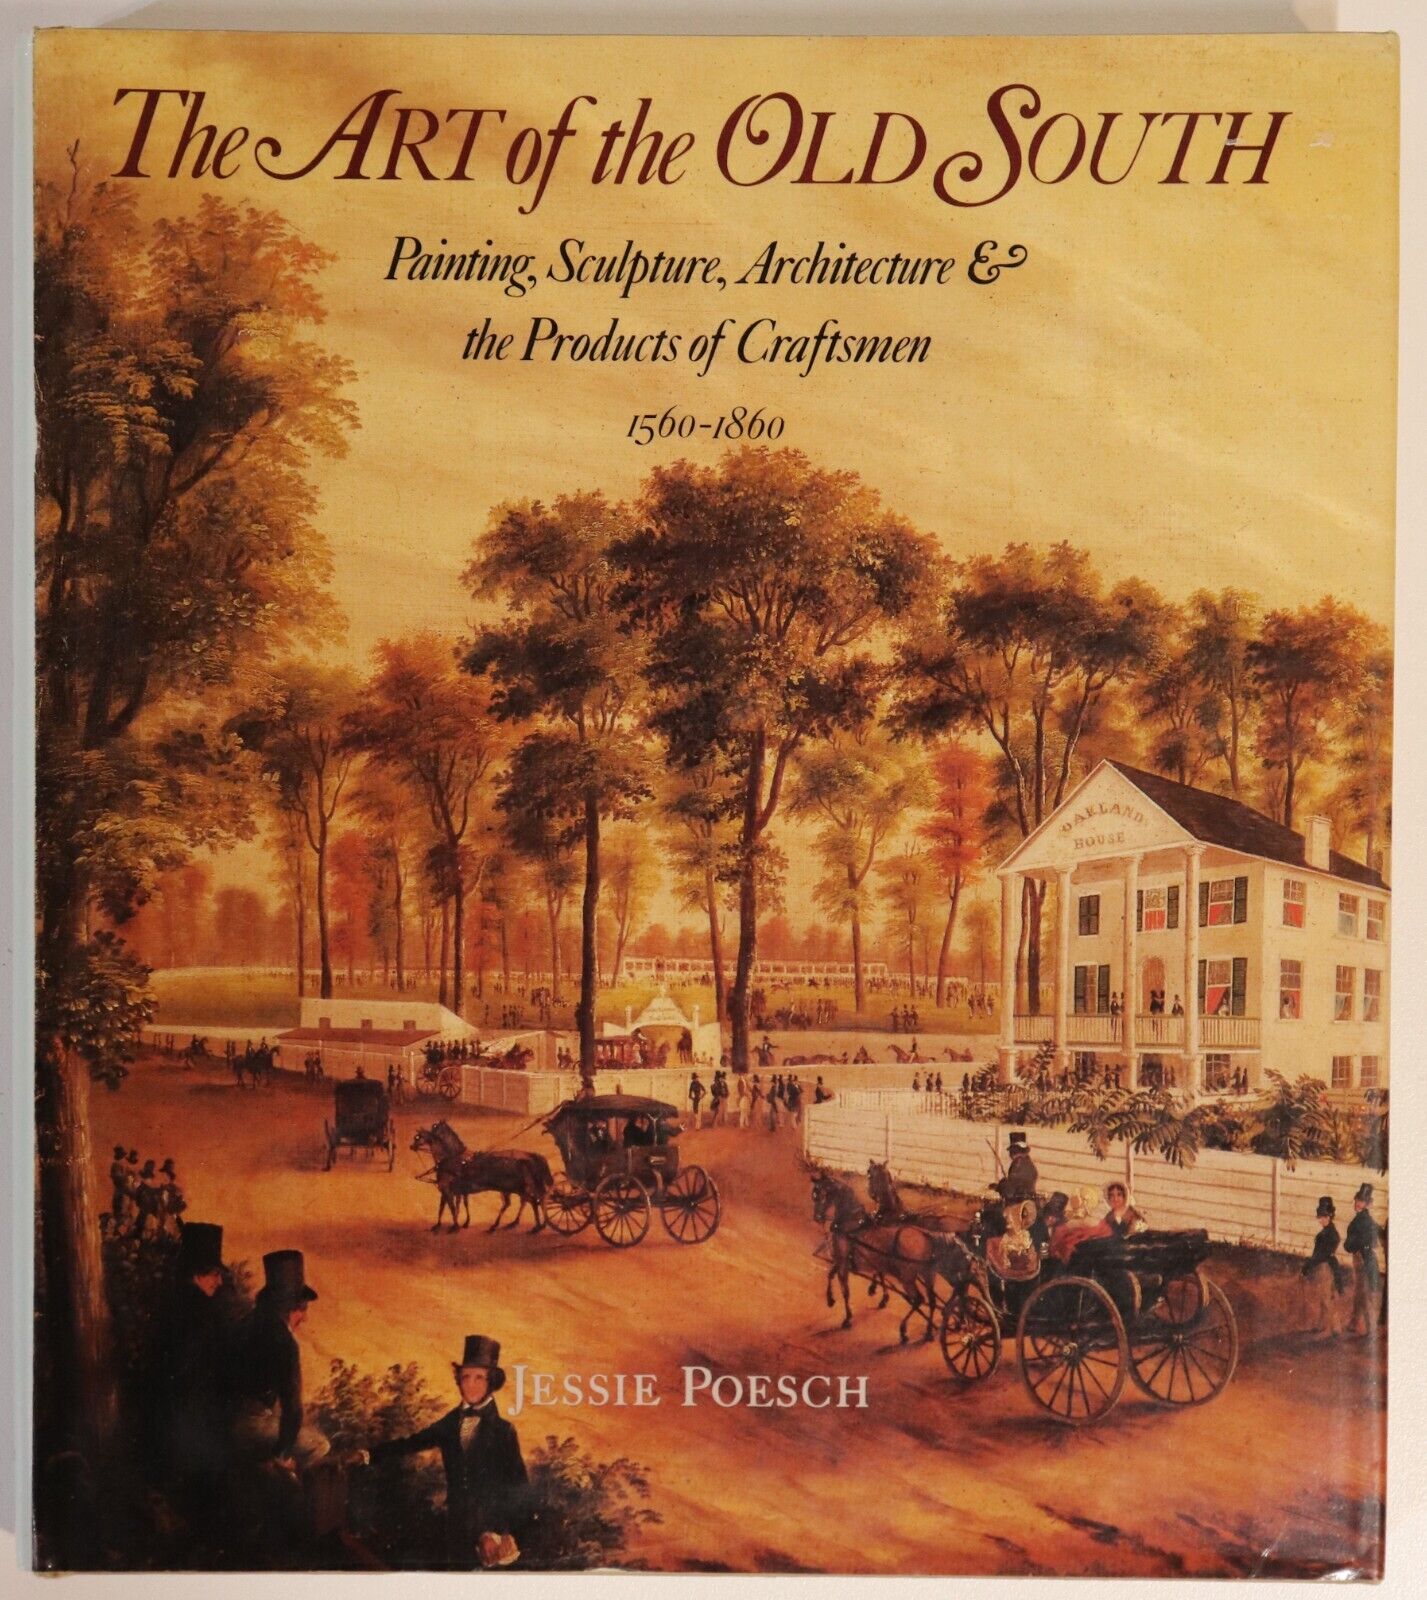 The Art Of The Old South - 1983 - Vintage American Art & Architecture Book